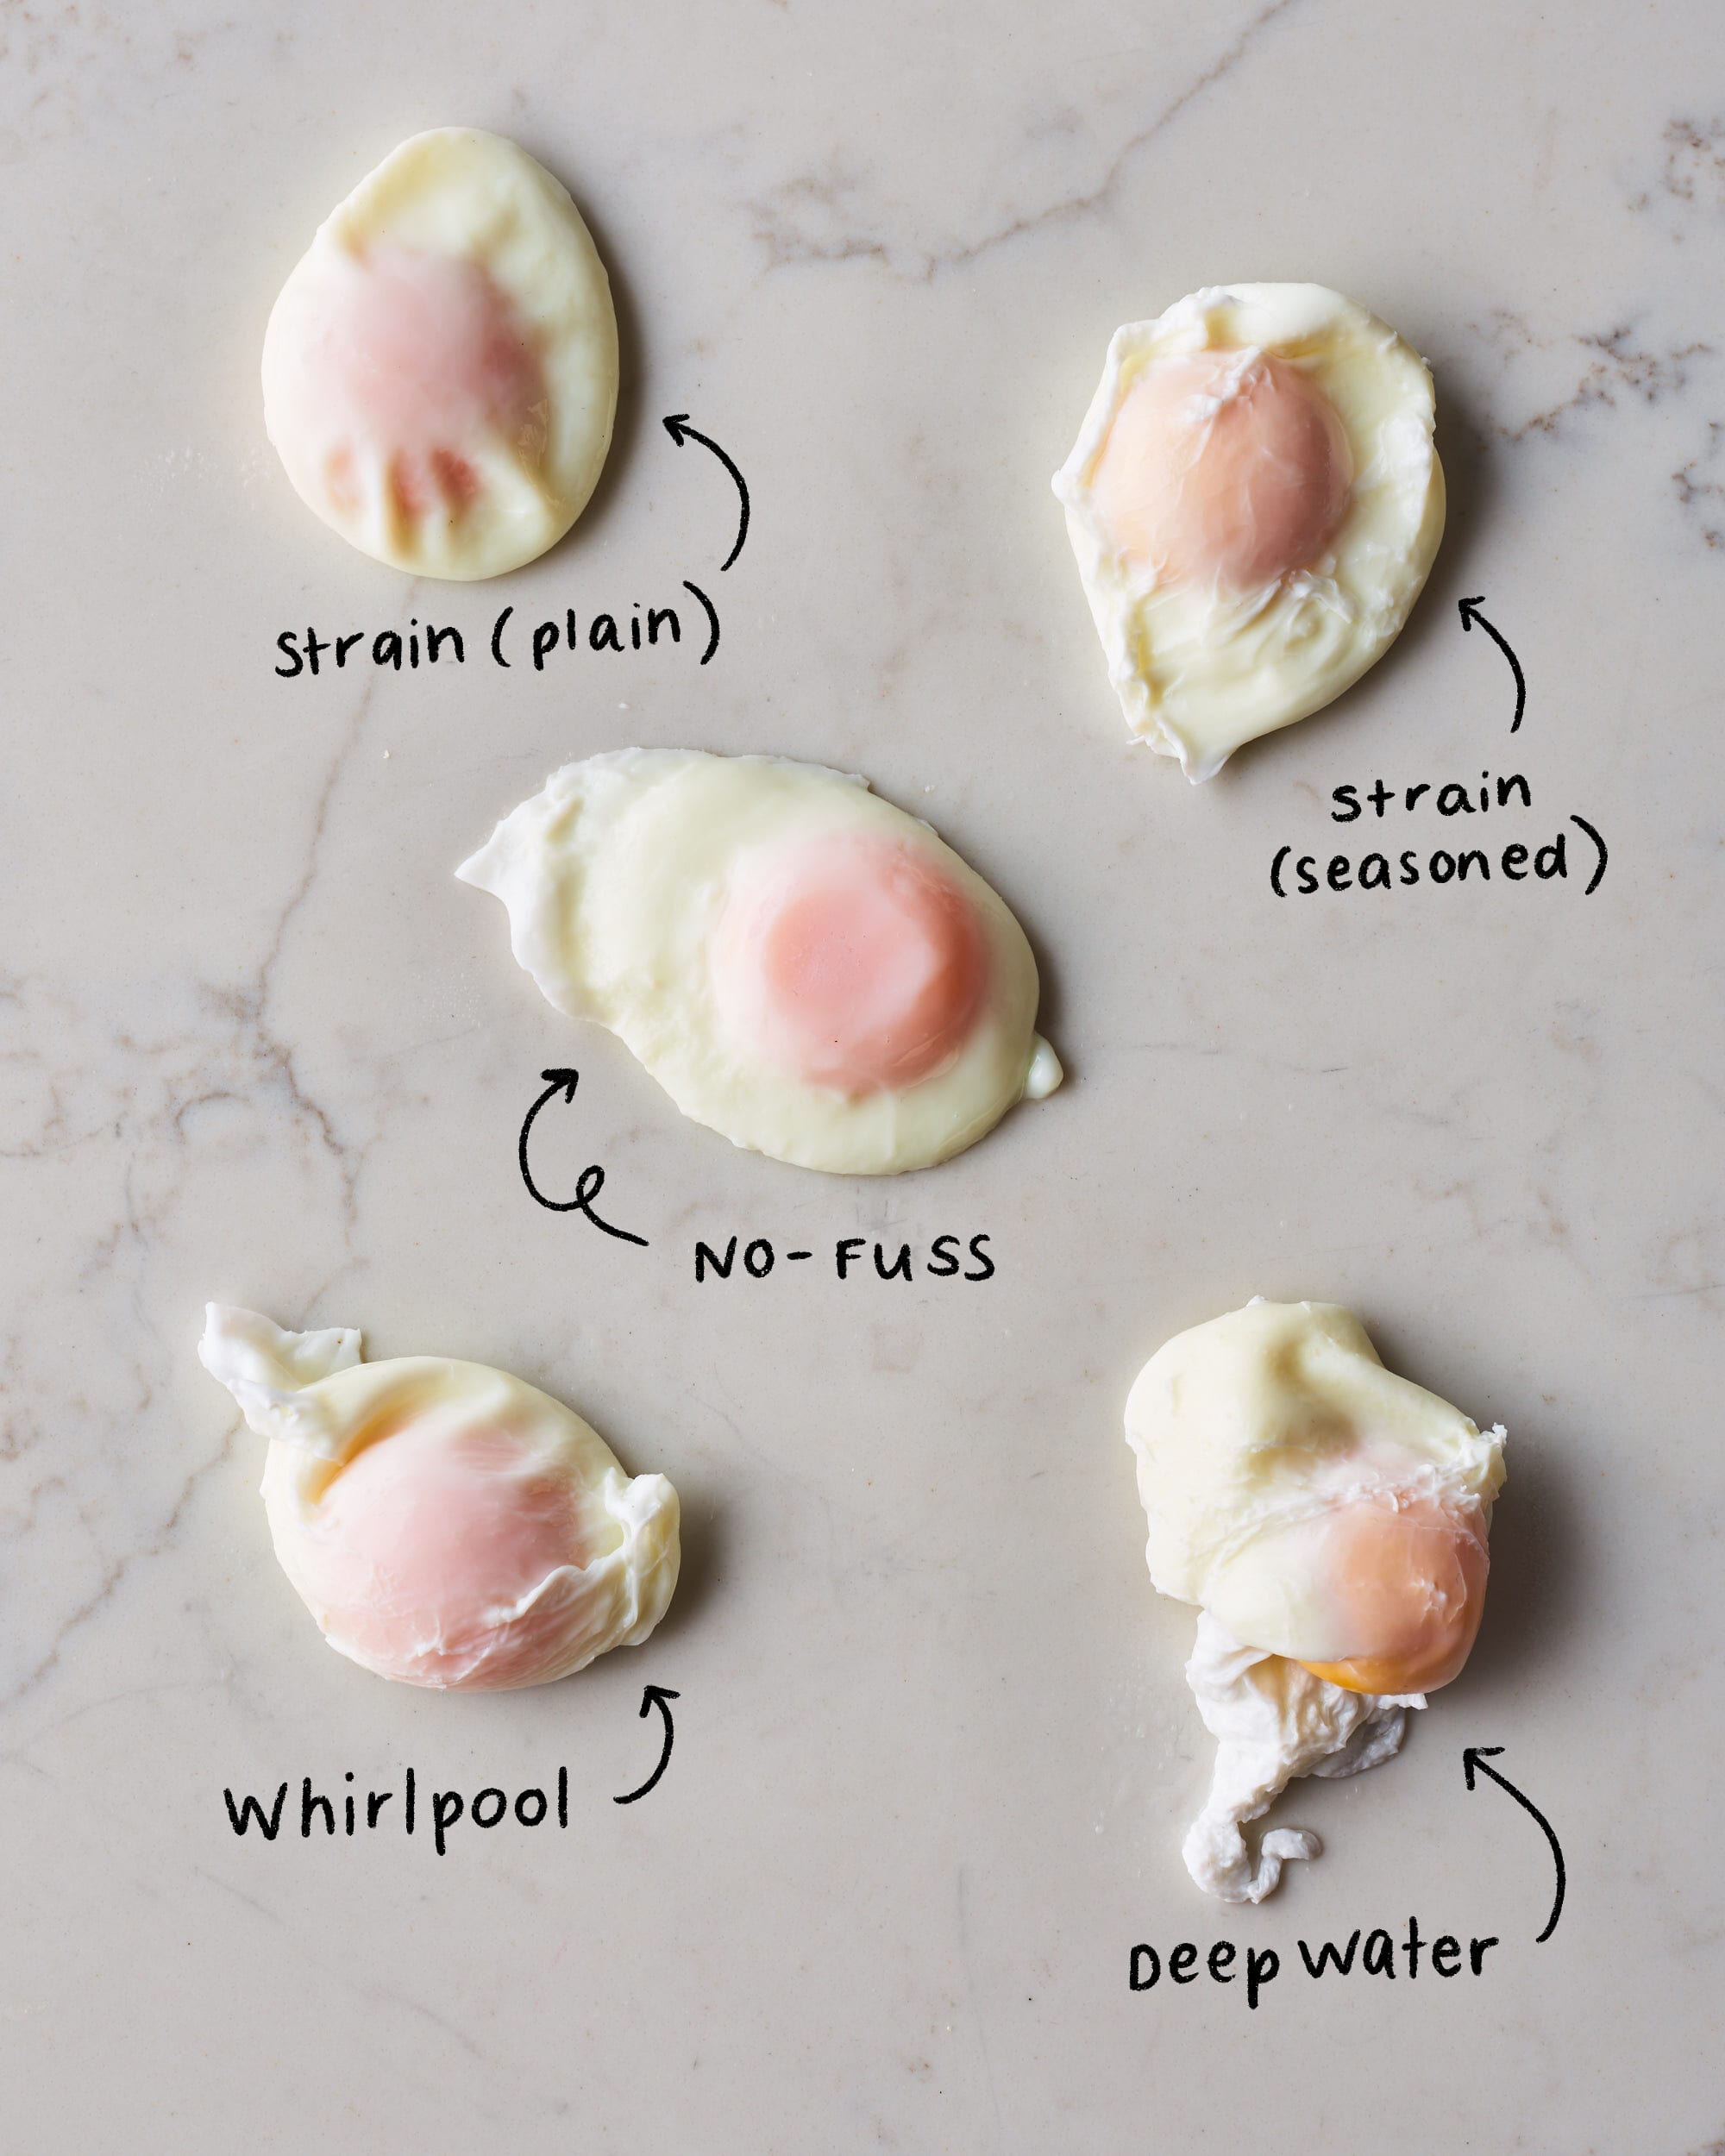 A Review Of 5 Different Egg Poaching Methods Kitchn